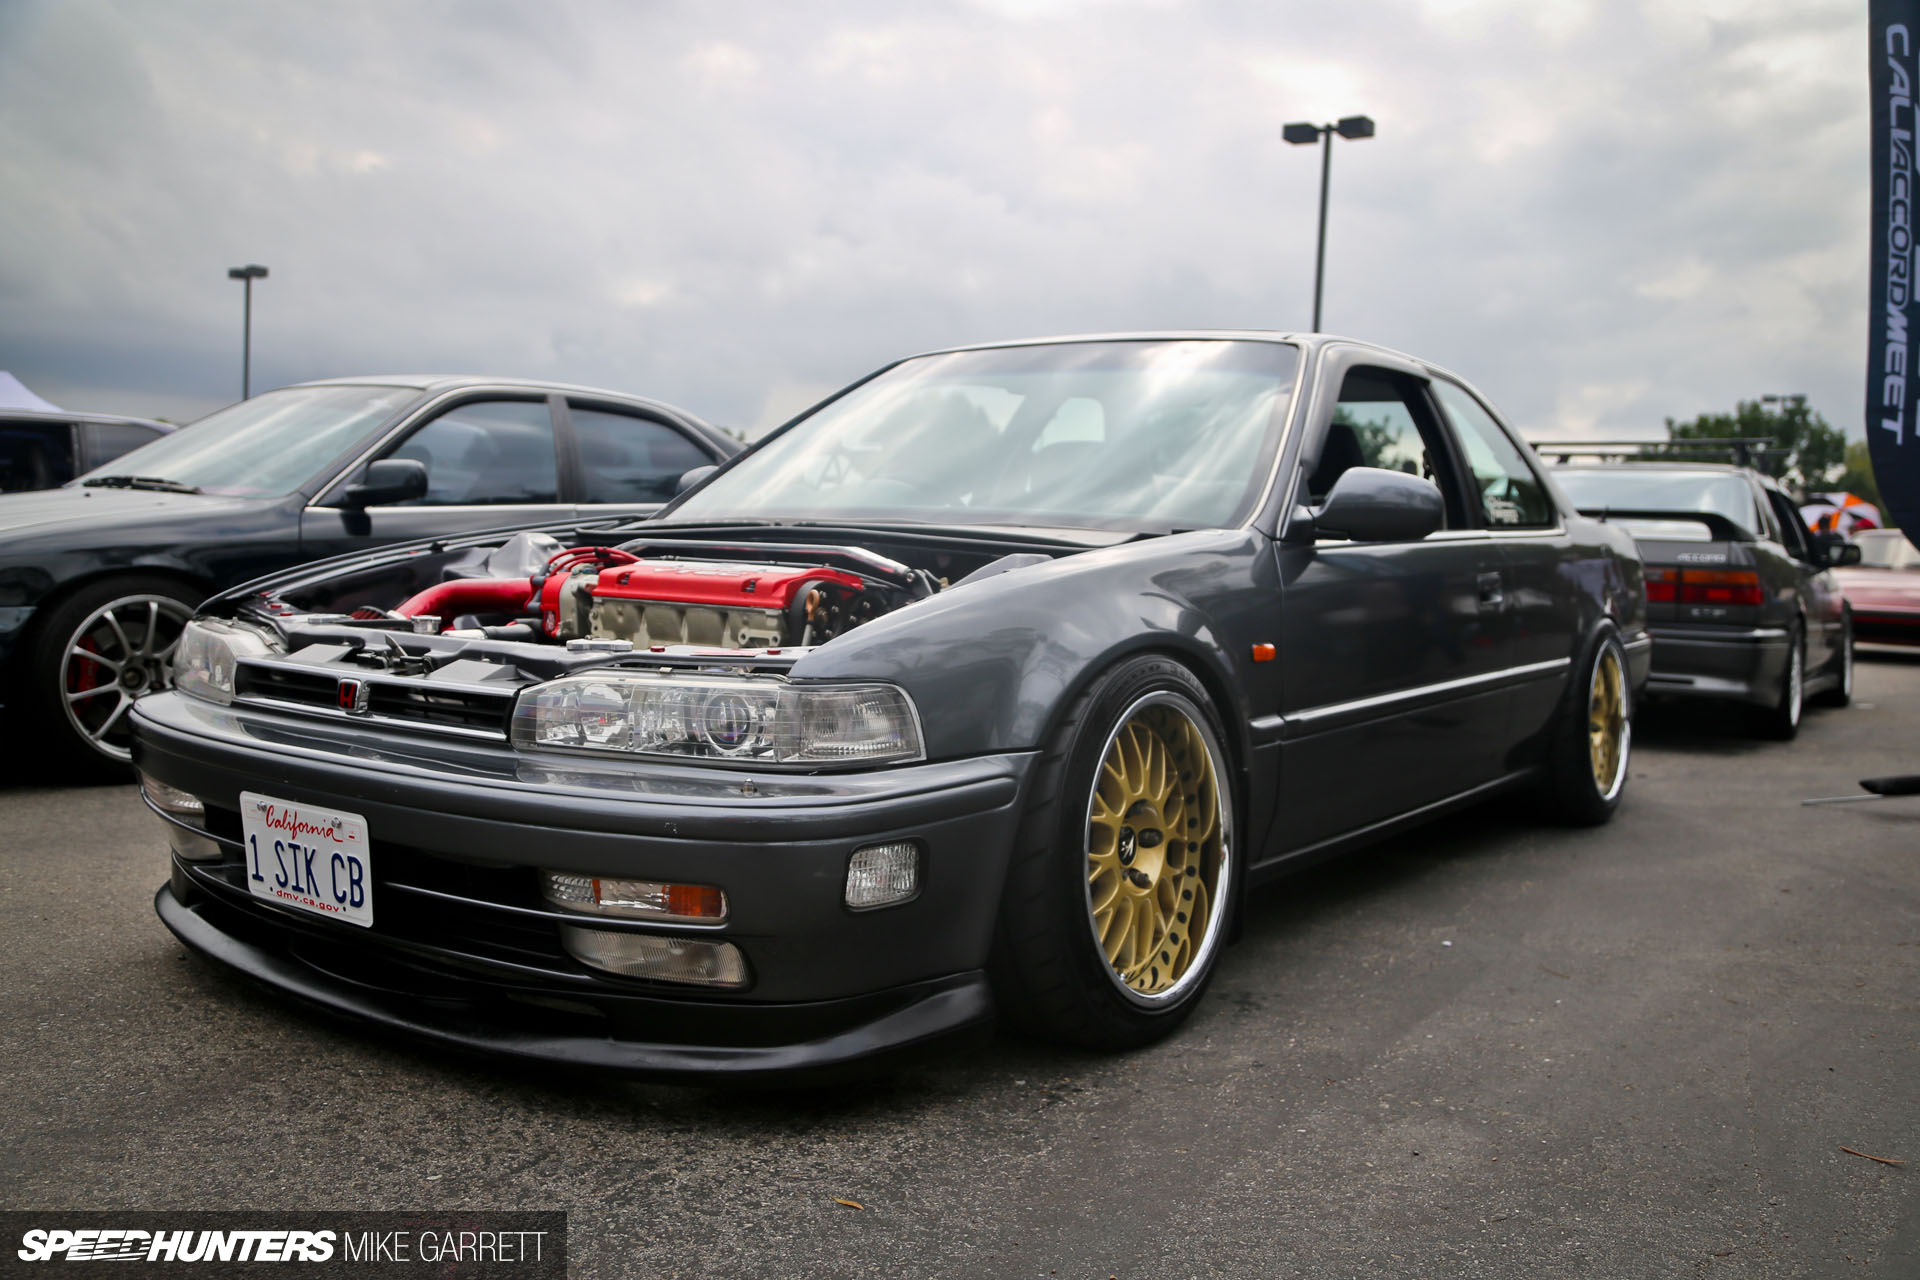 How To Build An Accord - Speedhunters